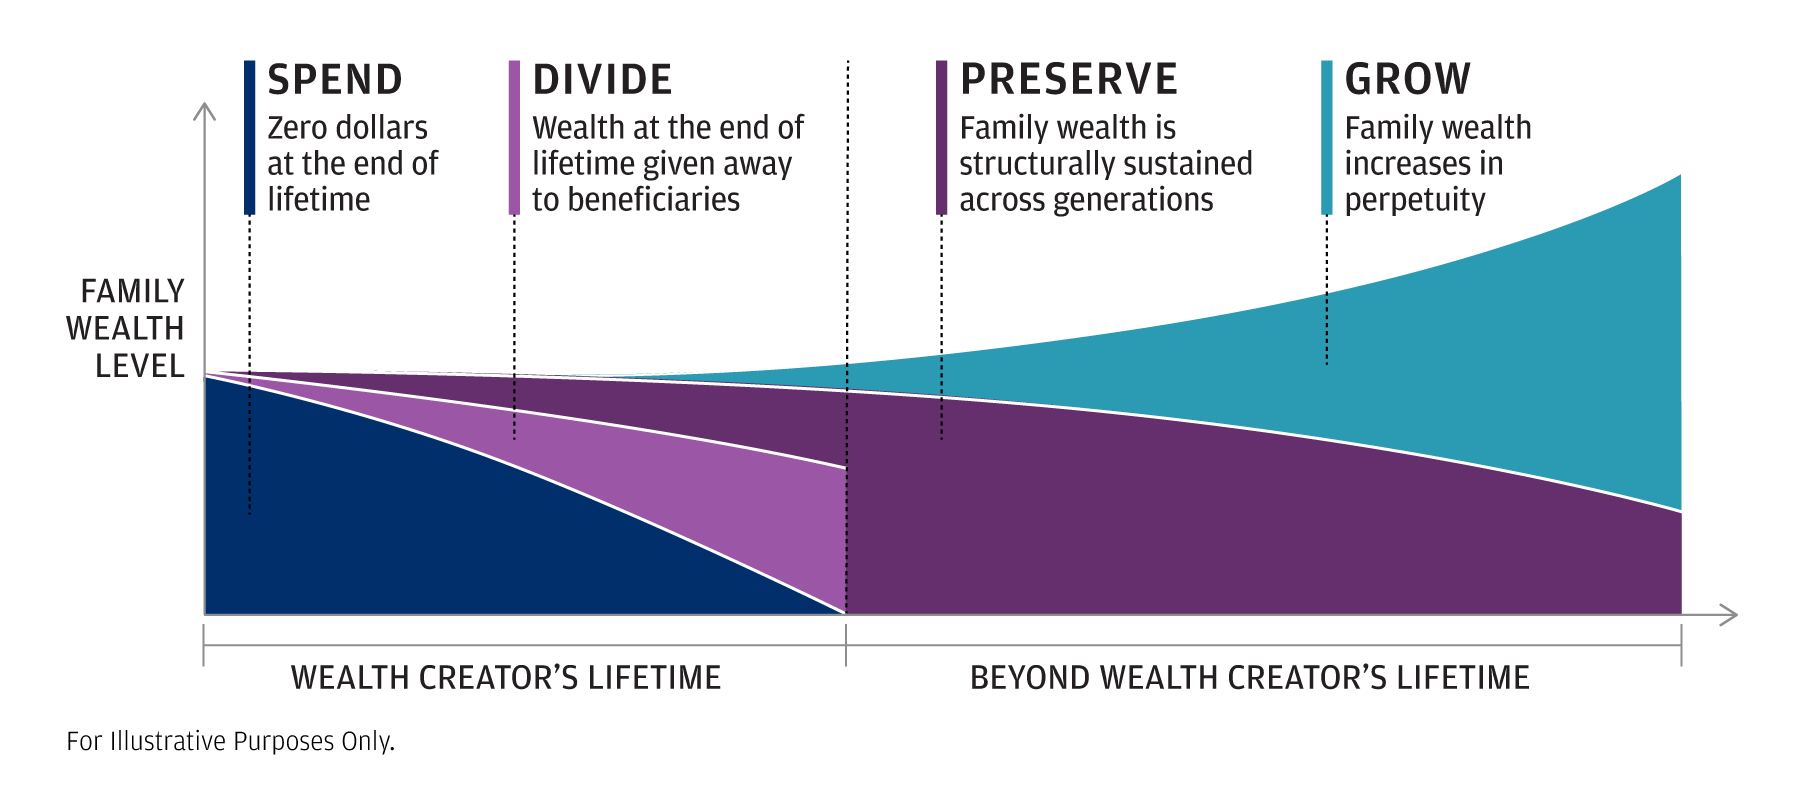 The graphic shows how the four foundational intents for wealth evolve during and beyond a wealth creator’s lifetime.